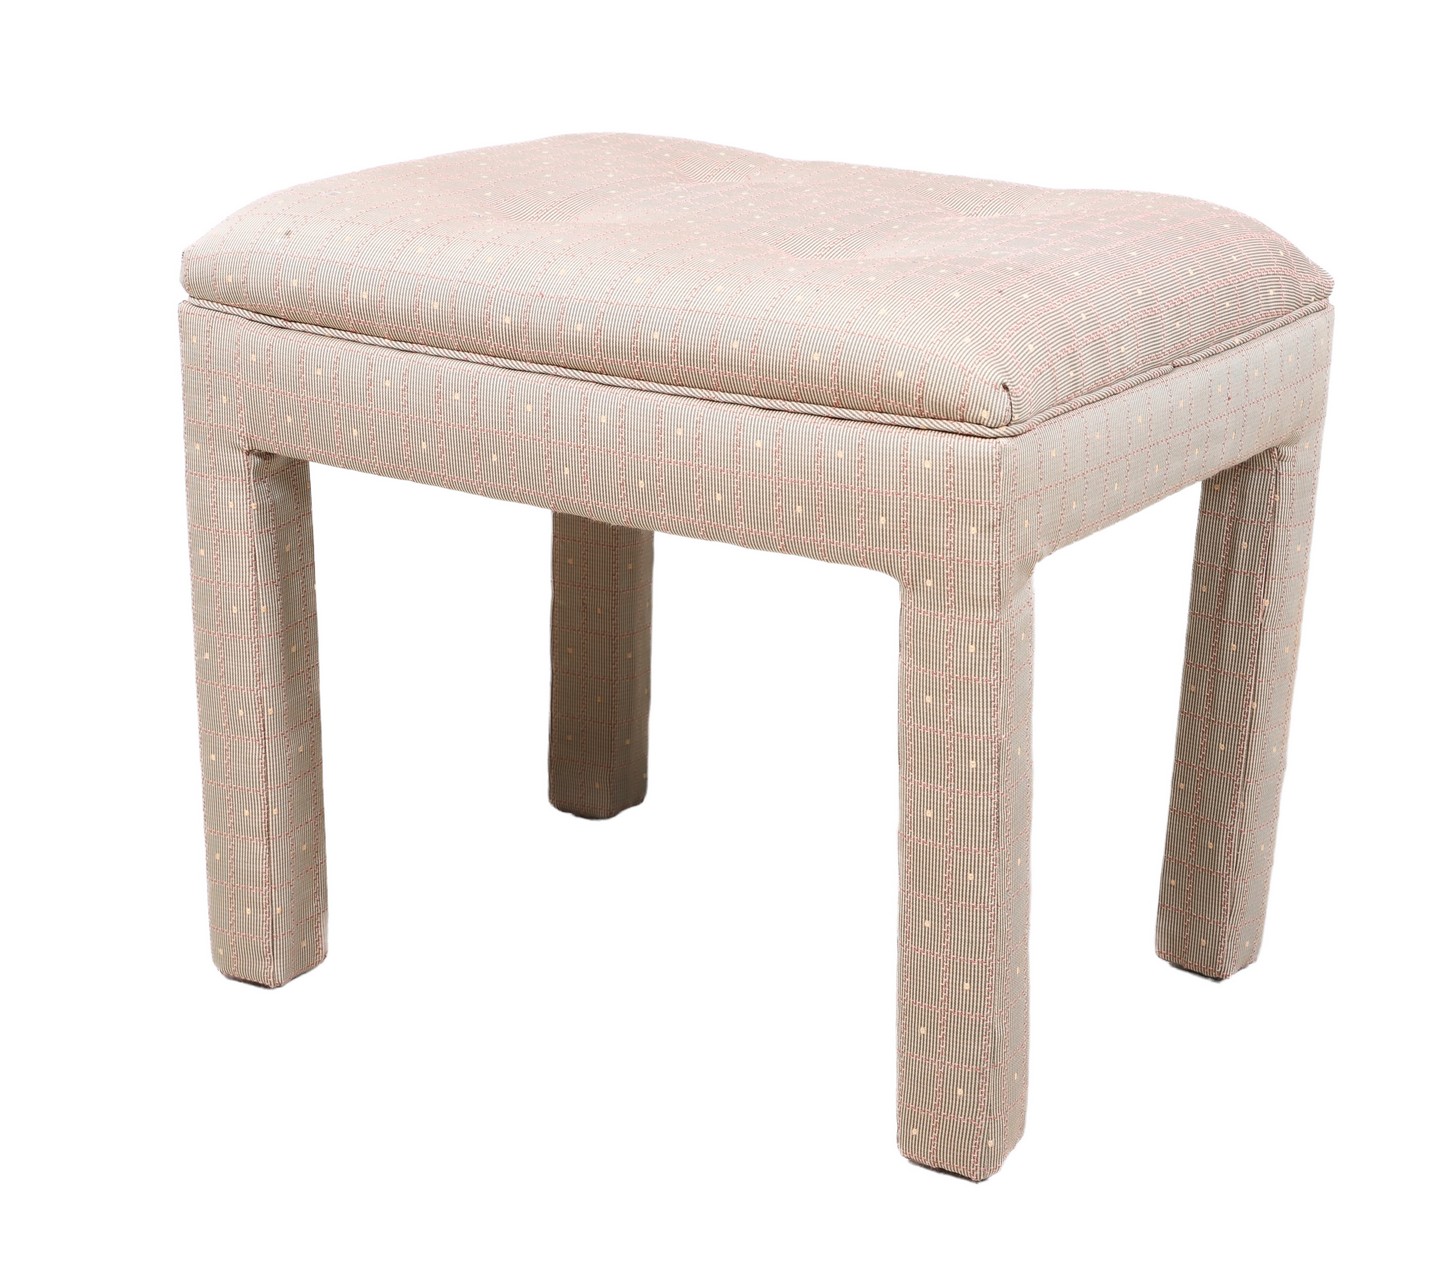 Parsons style Tufted upholstered